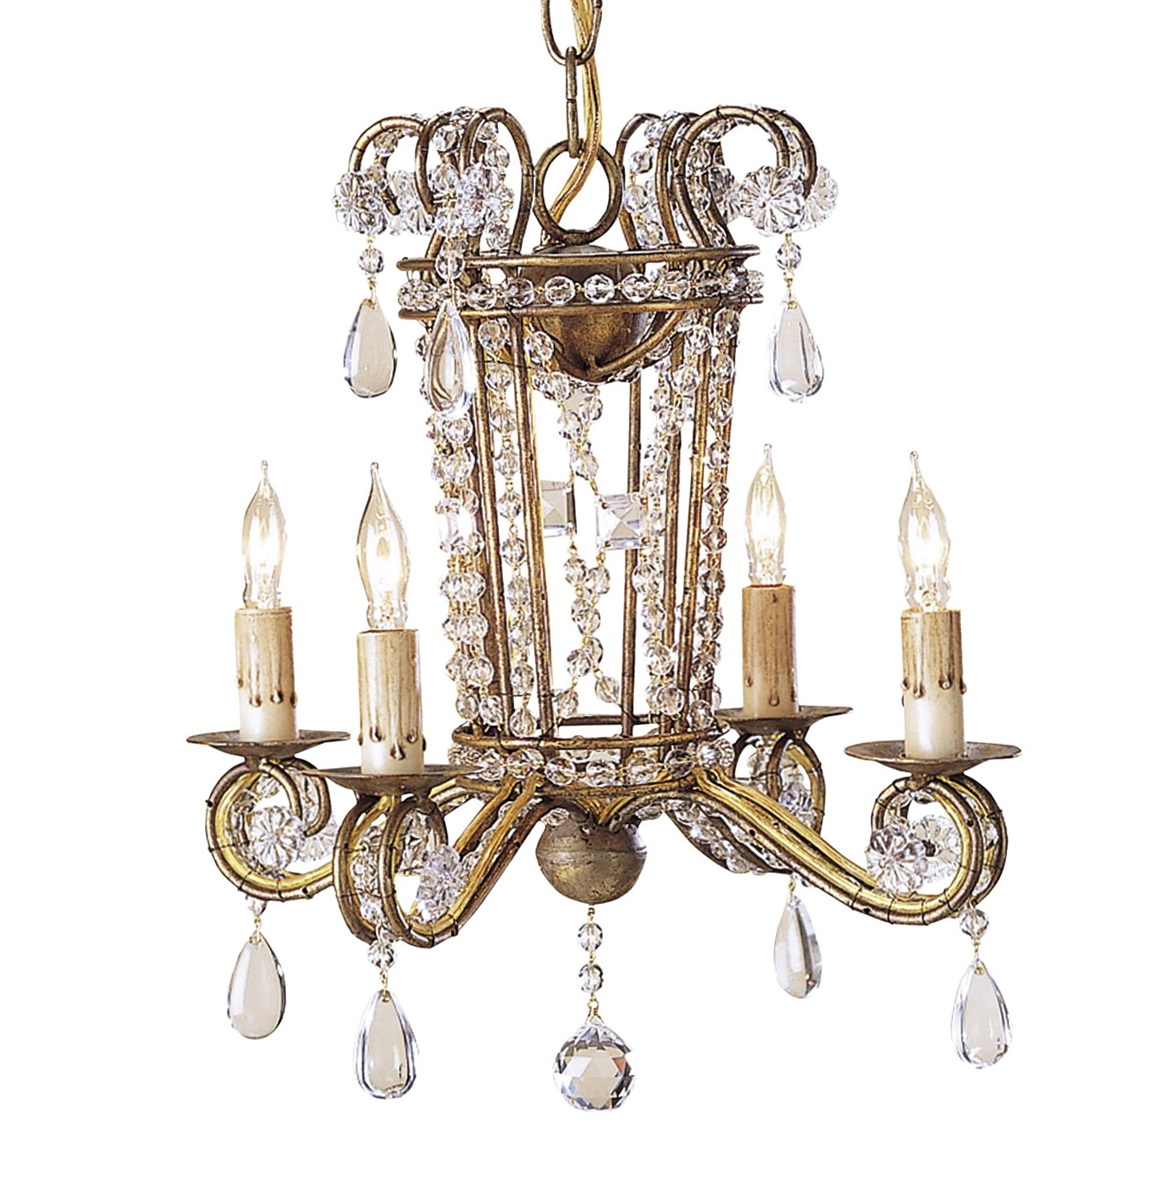 Dining Room Crystal Chandeliers Home Design | Transgenicnews small crystal chandeliers for dining room. dining room crystal chandelier lighting. crystal chandeliers for dining room.